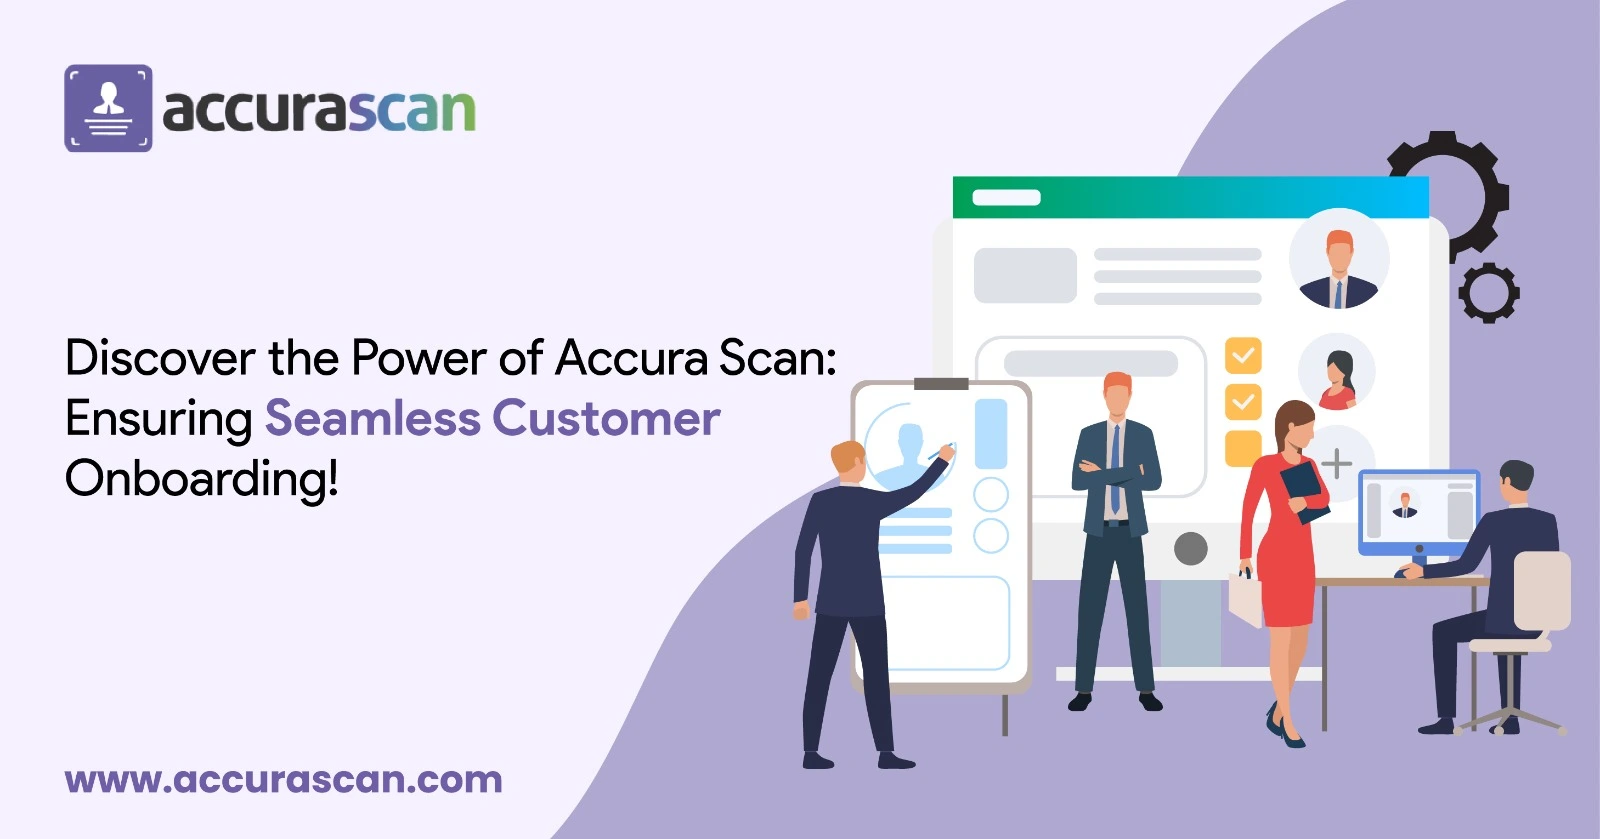 Discover the Power of Accura Scan: Ensuring Seamless Customer Onboarding!